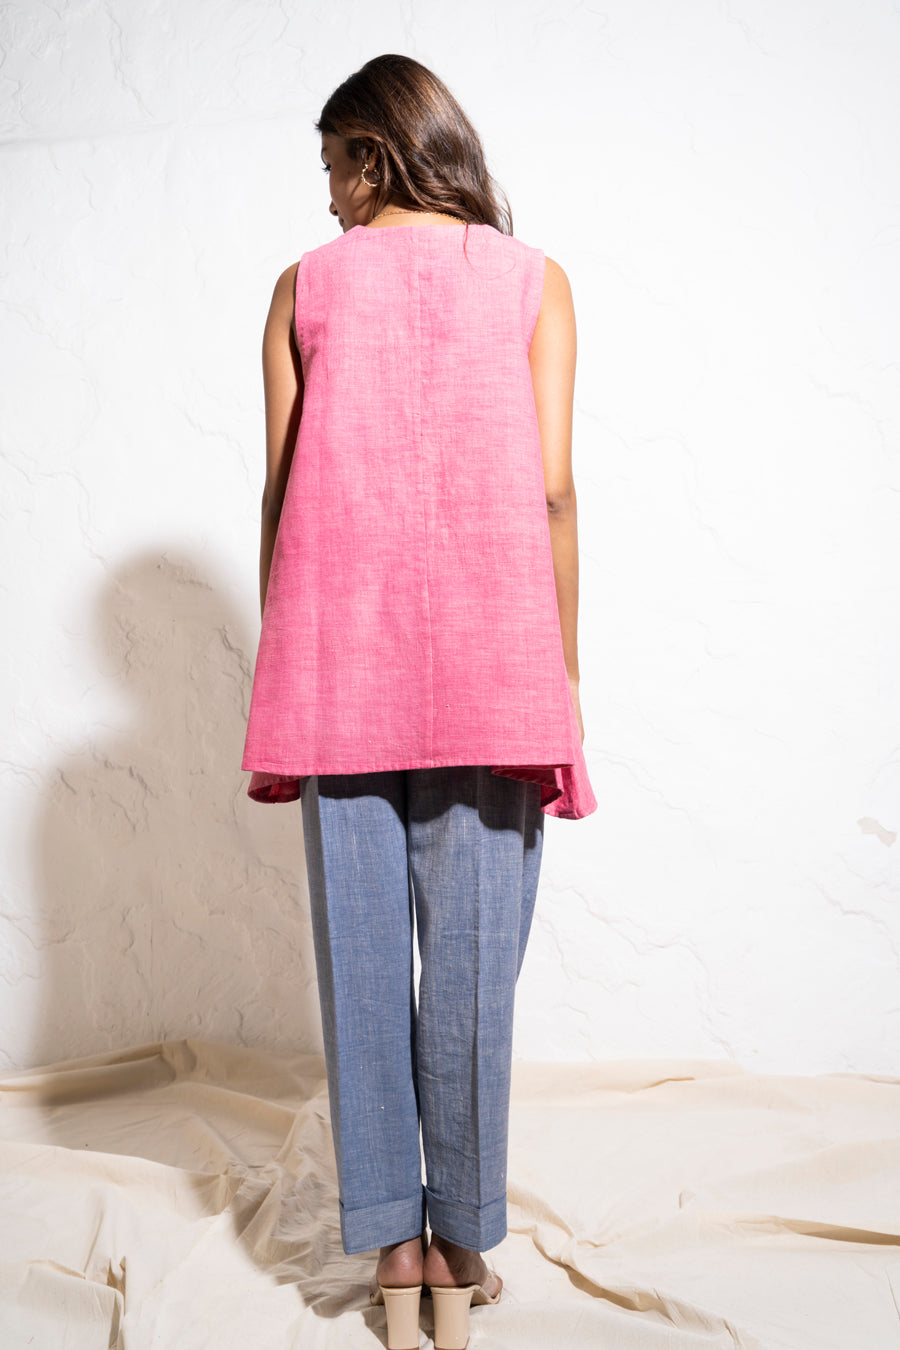 Embroidered Yoke Handwoven Berry Pink Top